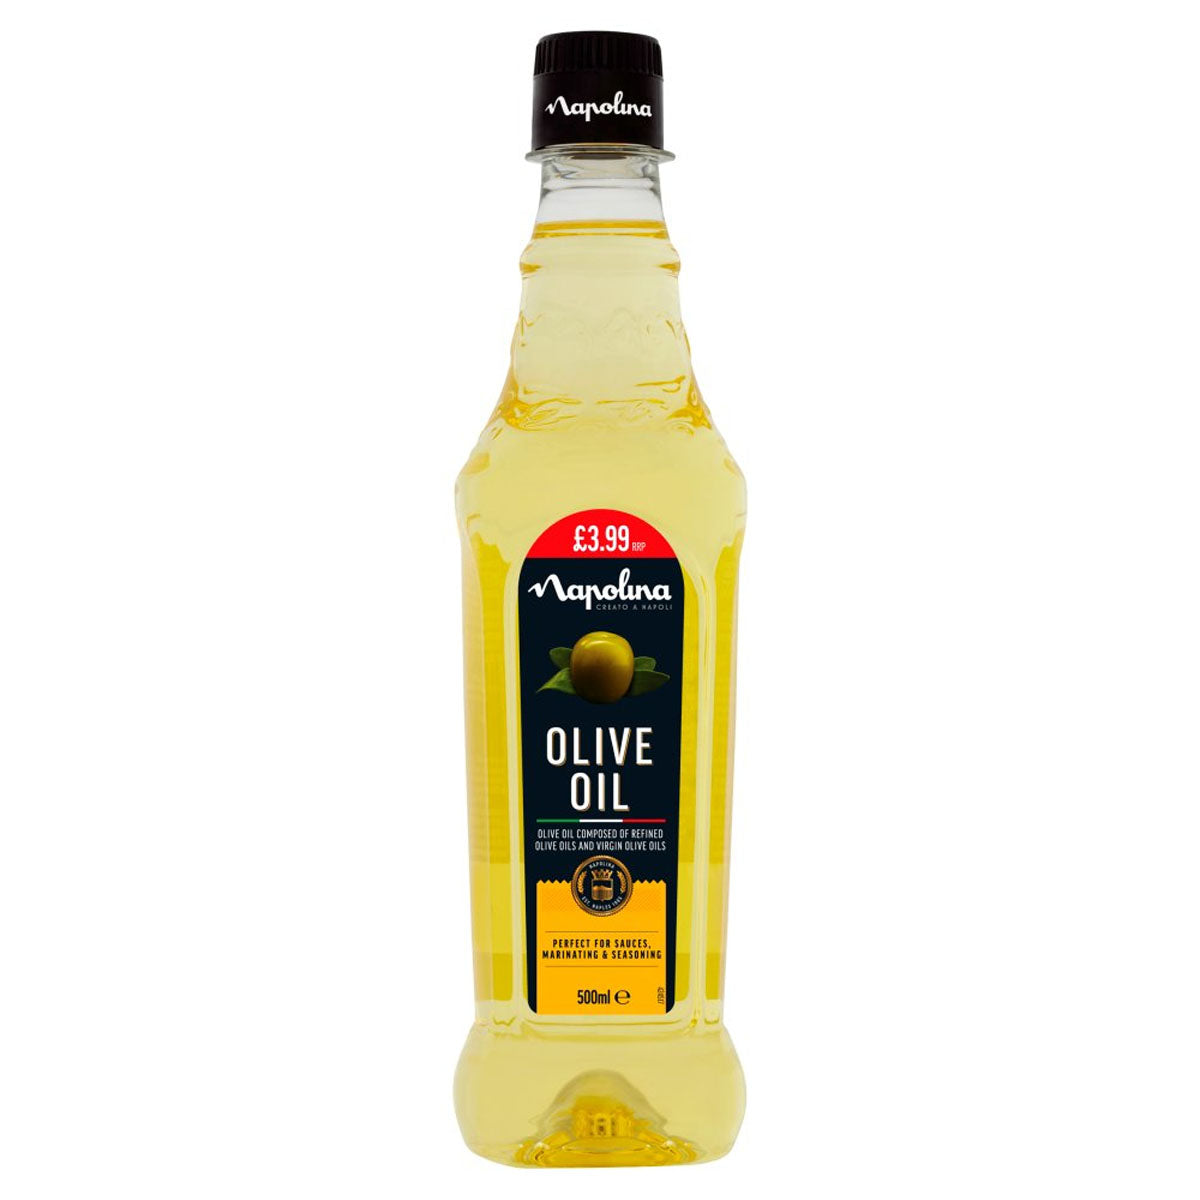 A bottle of Napolina - Olive Oil - 500ml on a white background.